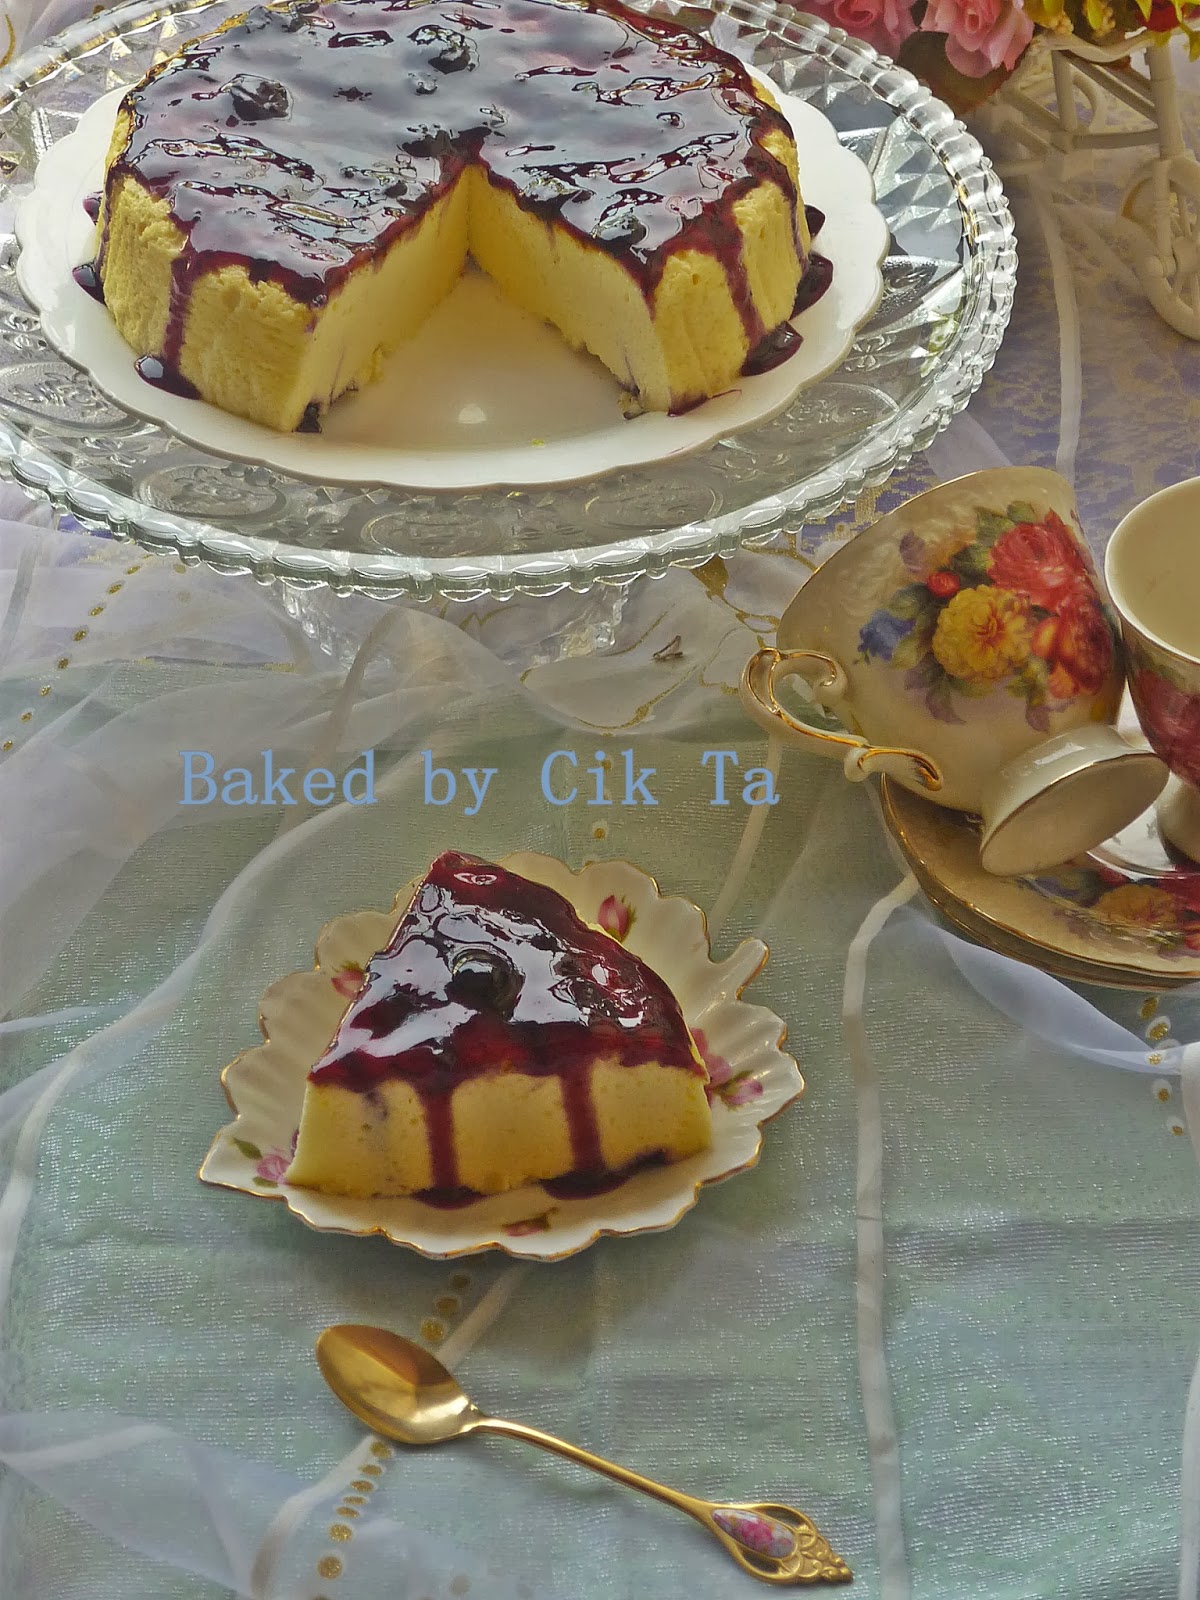 BAKED BY CIK TA: BLUEBERRY JAPANESE COTTON CHEESE CAKE